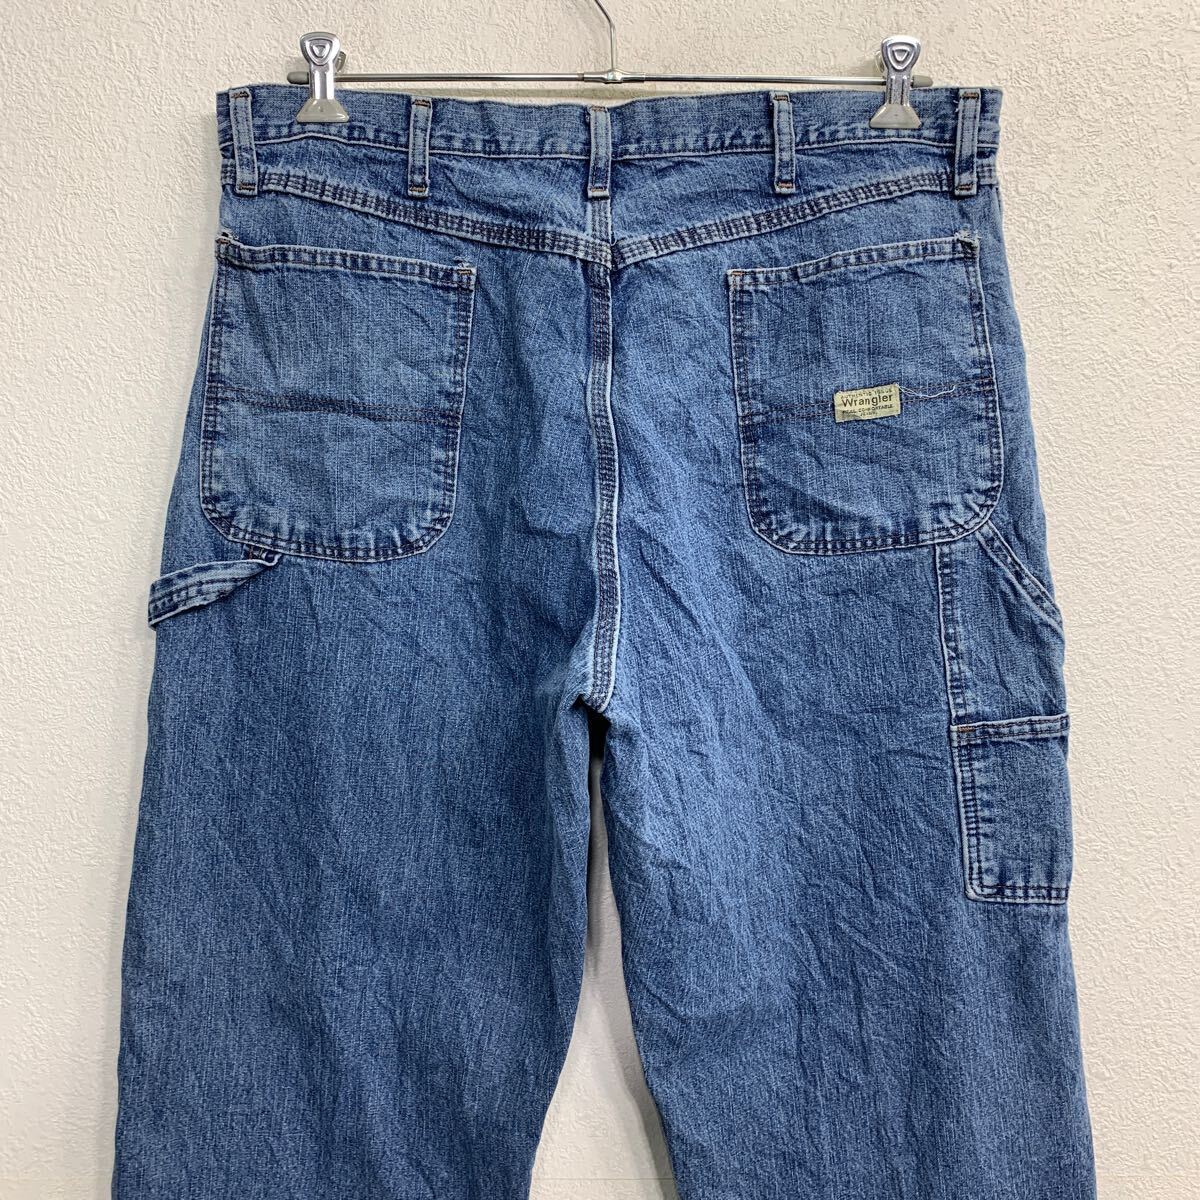 Wrangler Denim painter's pants W38 Wrangler big size blue cotton old clothes . America buying up 2403-995